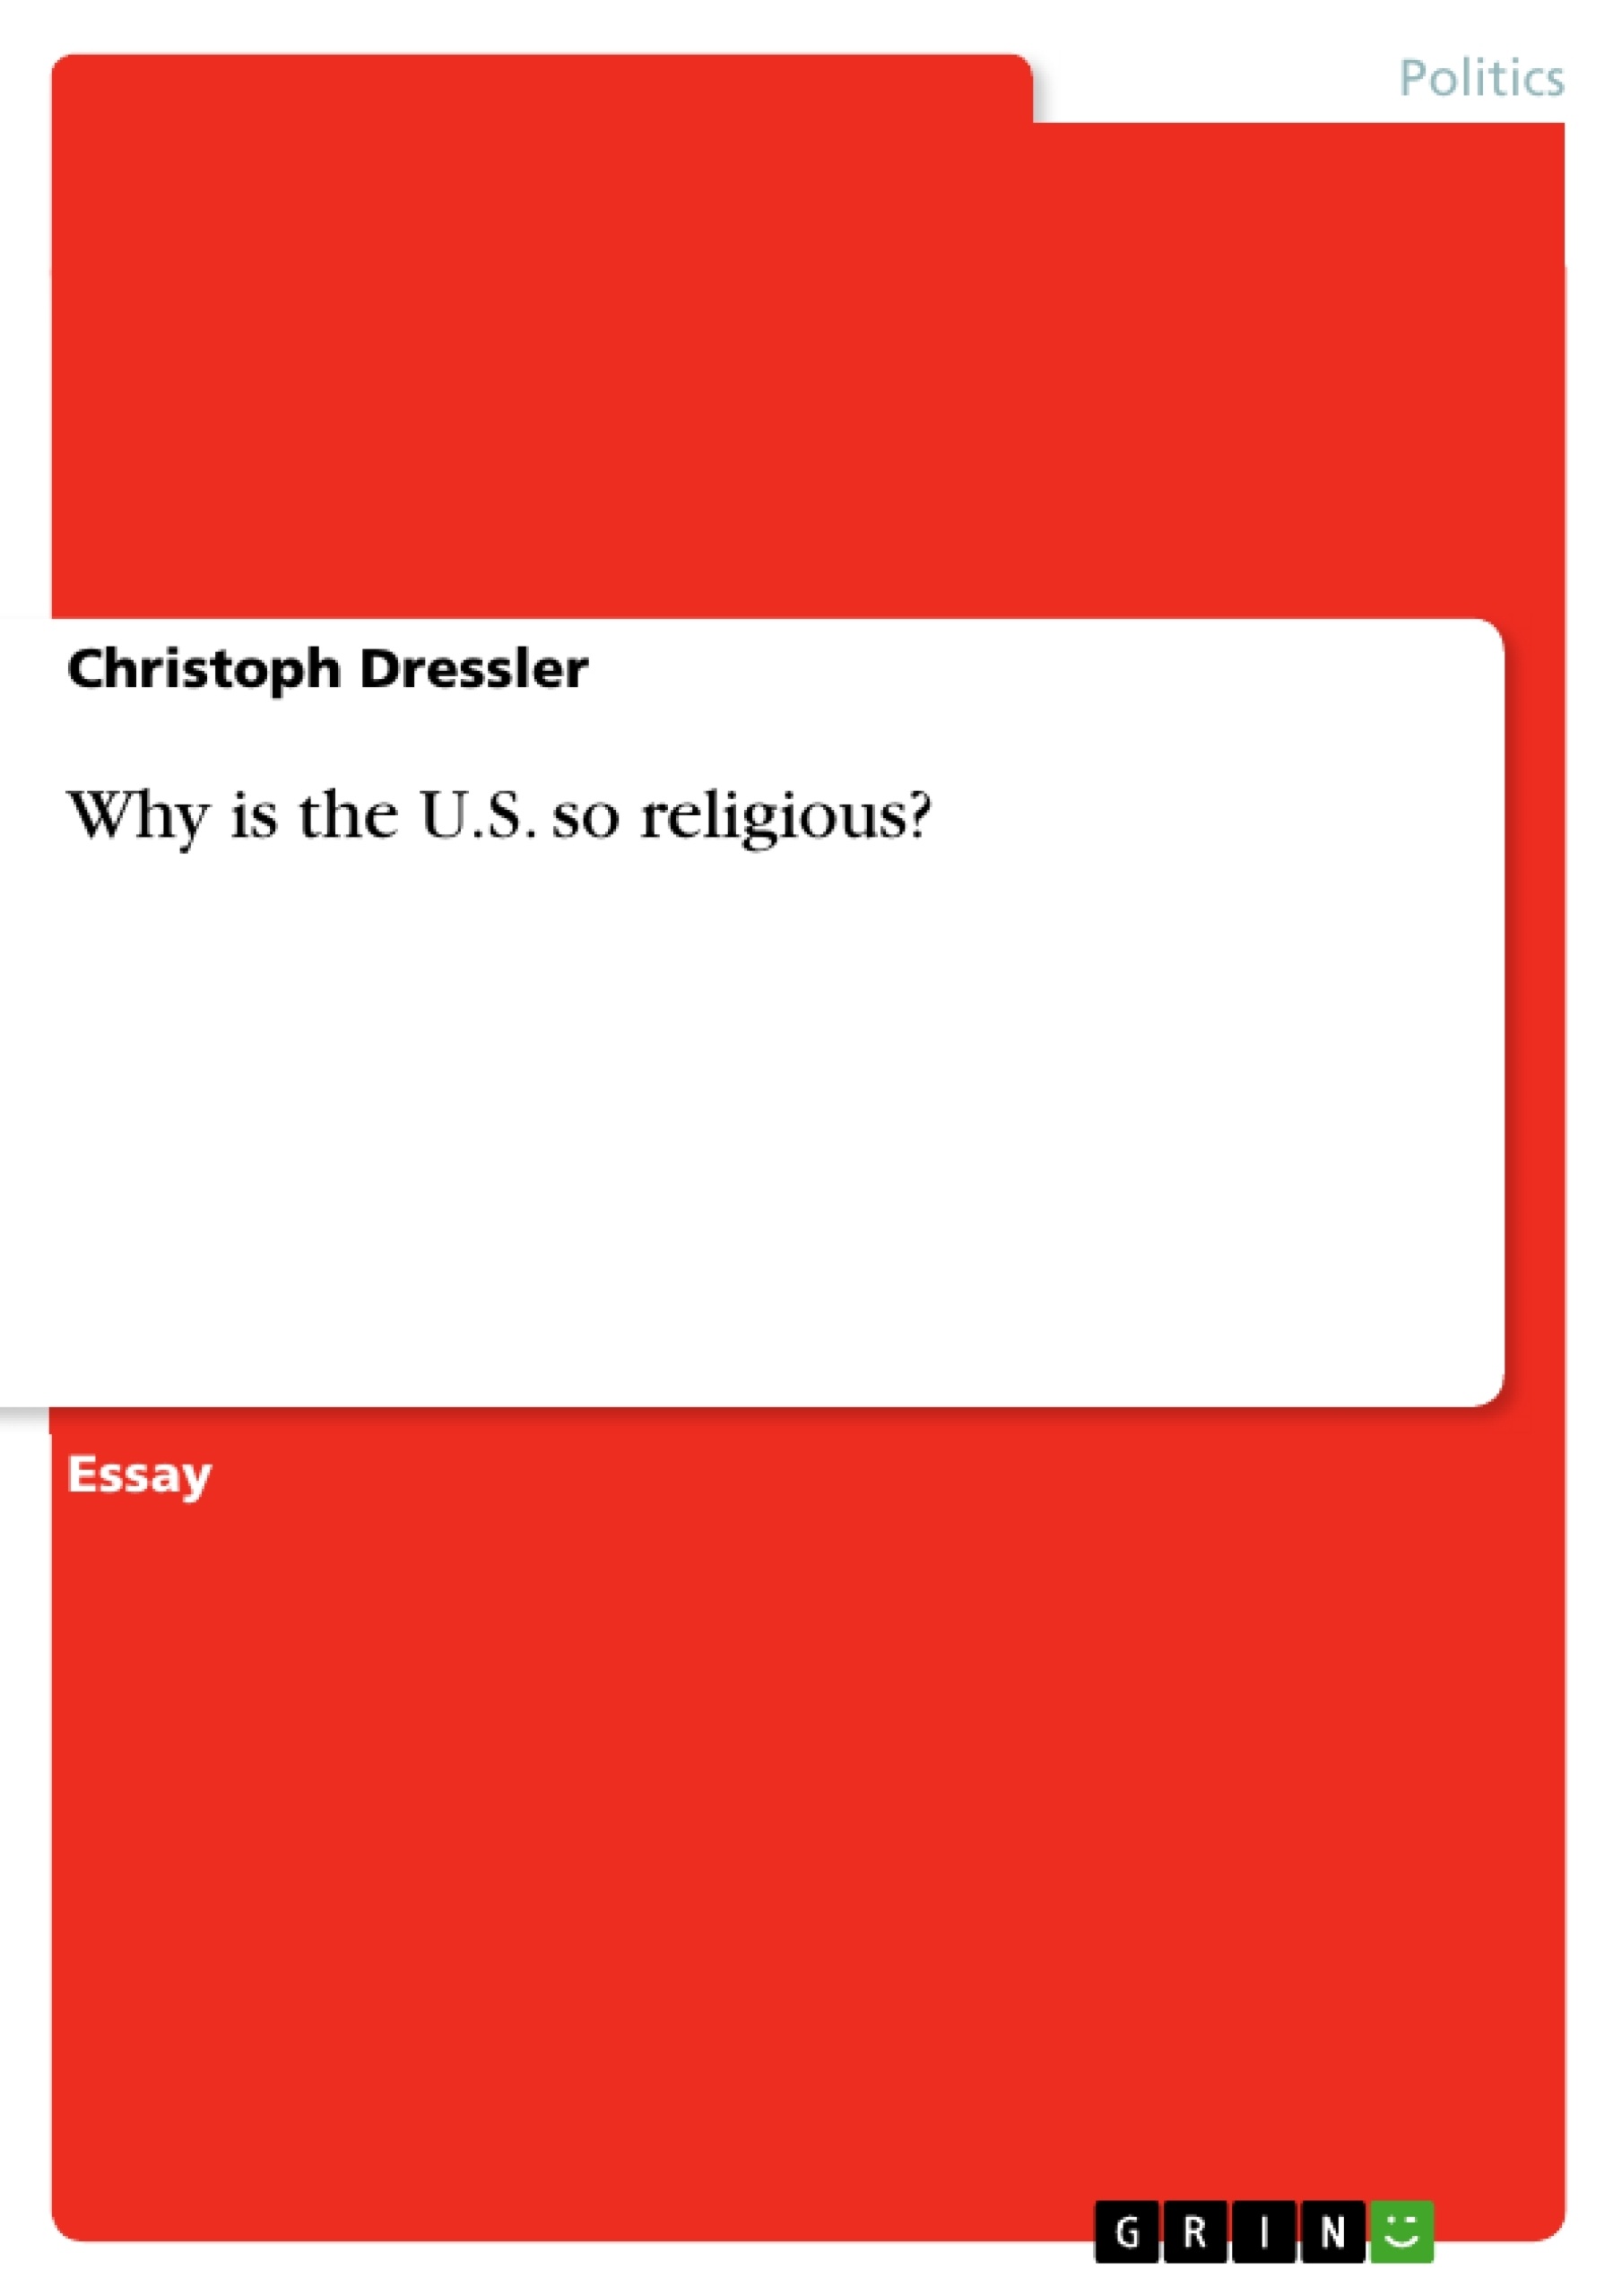 Titre: Why is the U.S. so religious?